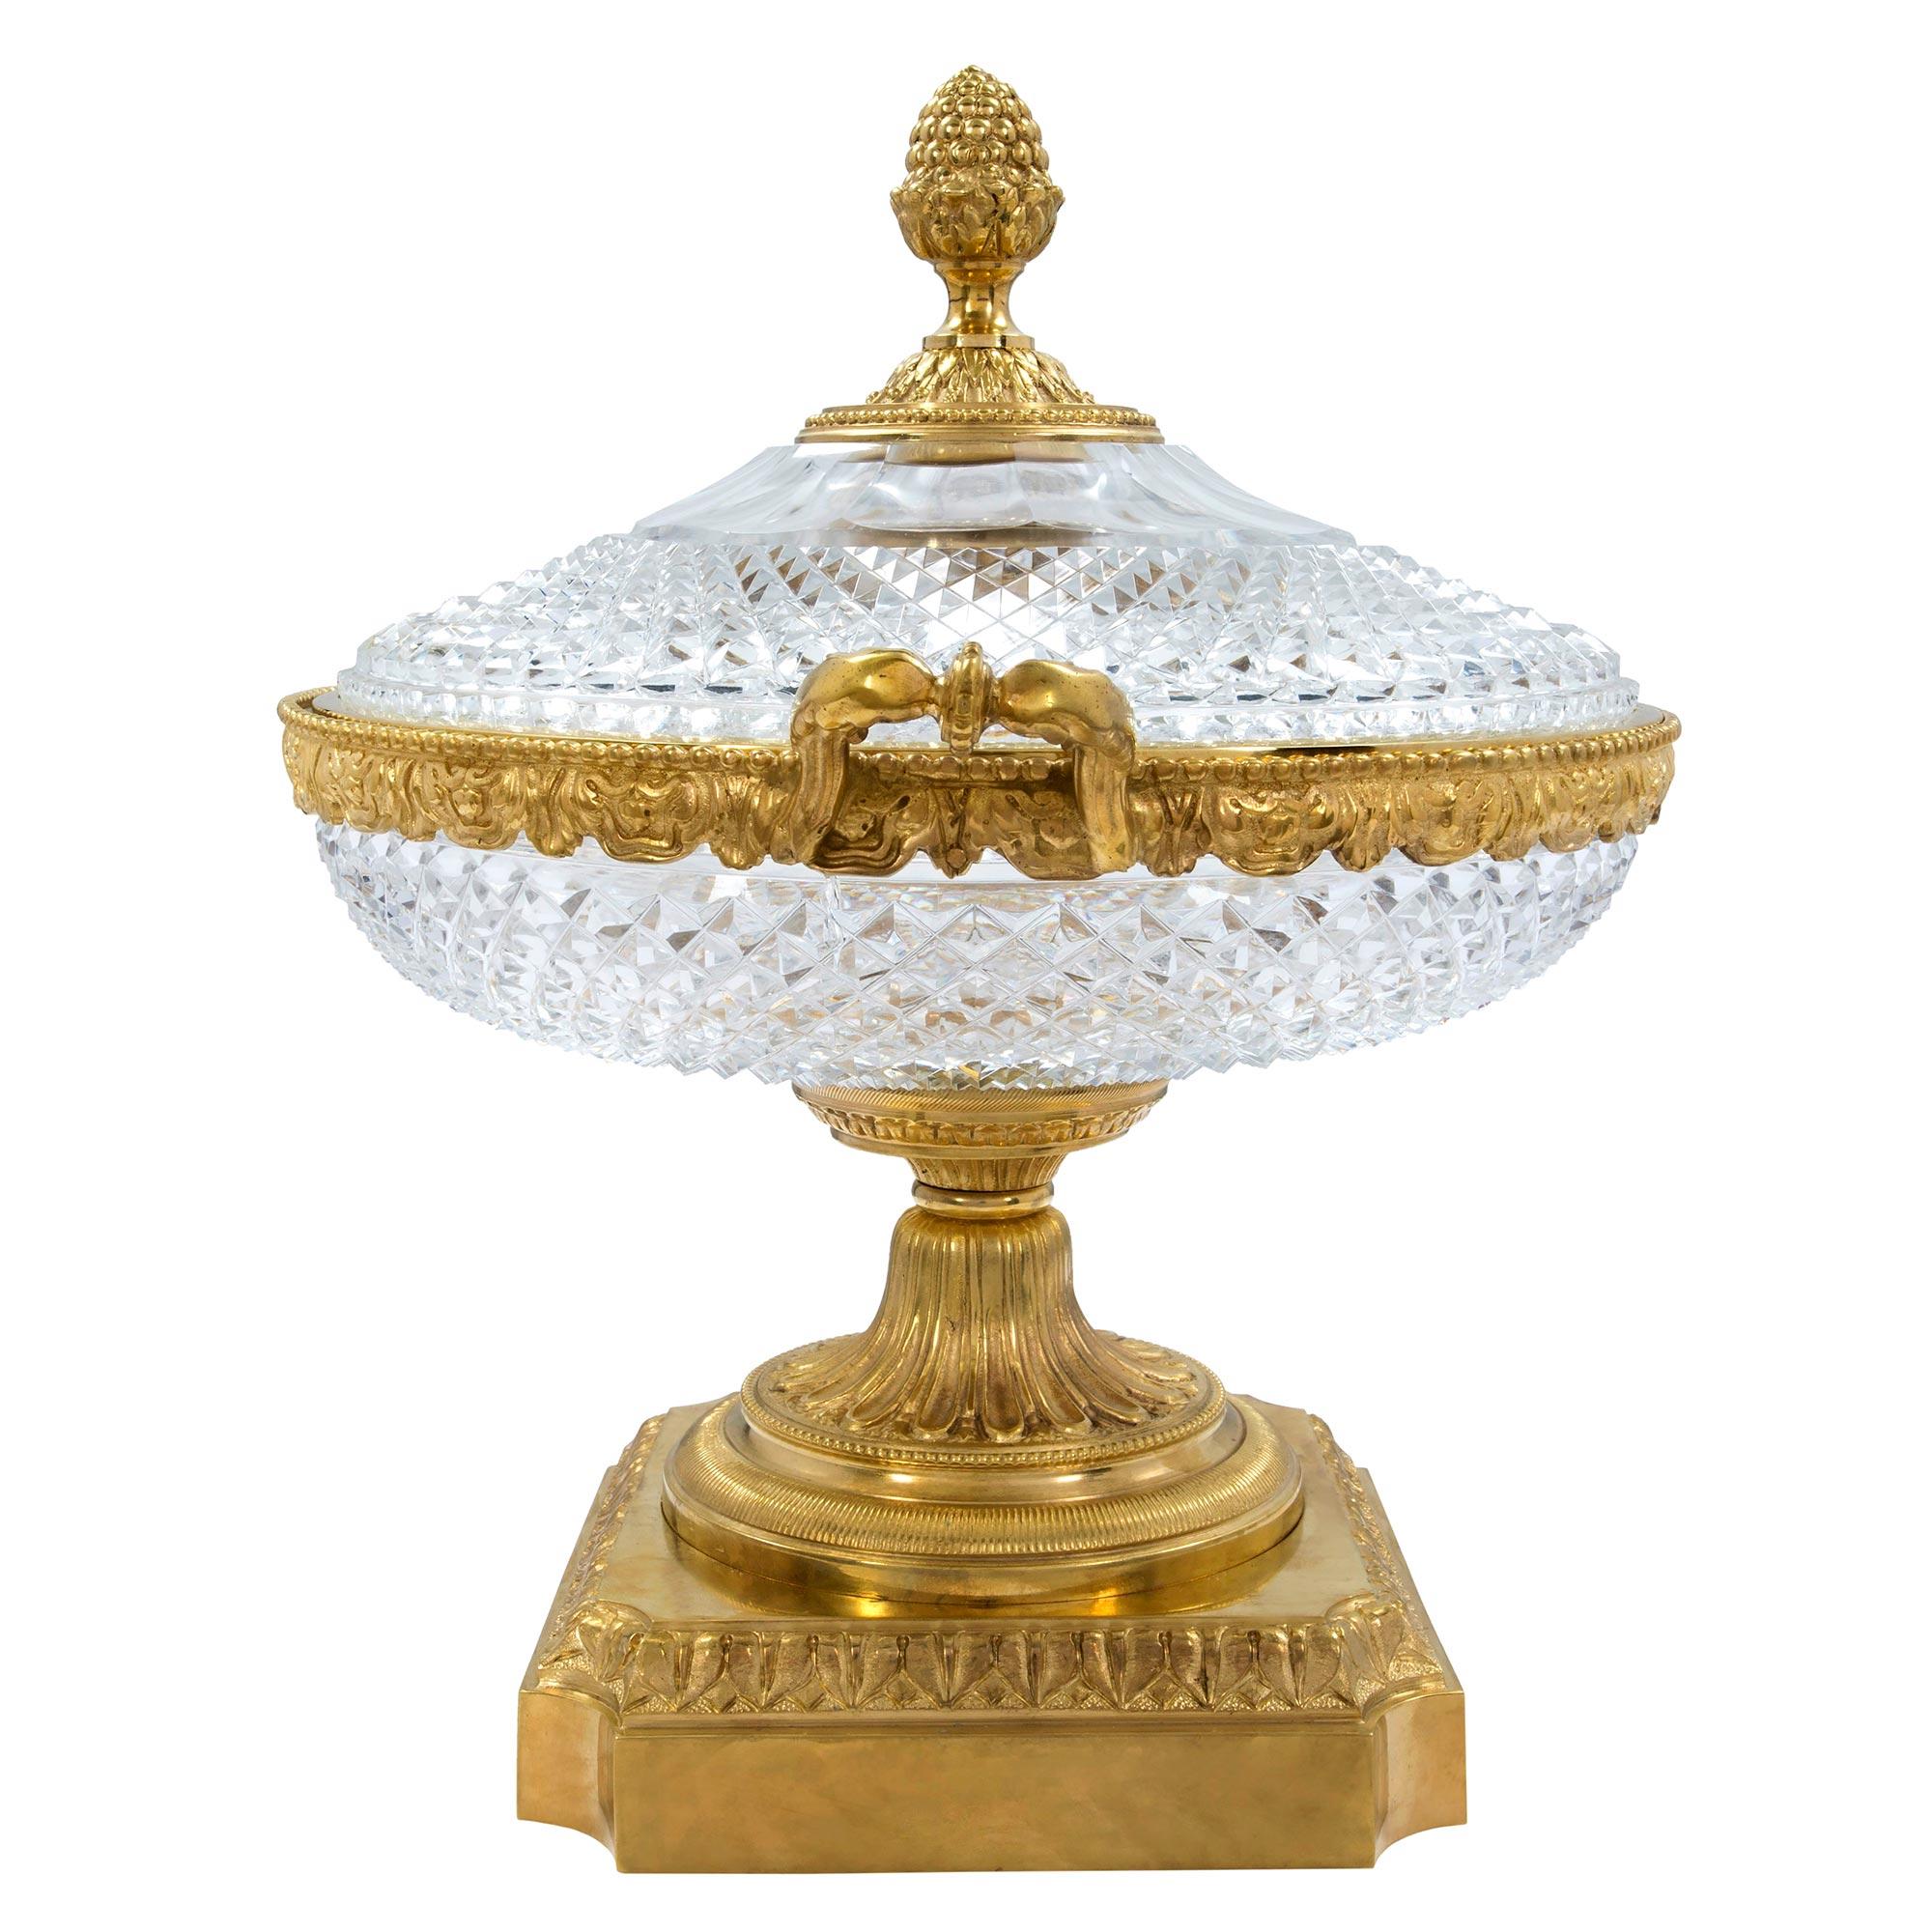 French Mid-19th Century Louis XVI Style Baccarat Crystal and Ormolu Centerpiece For Sale 1